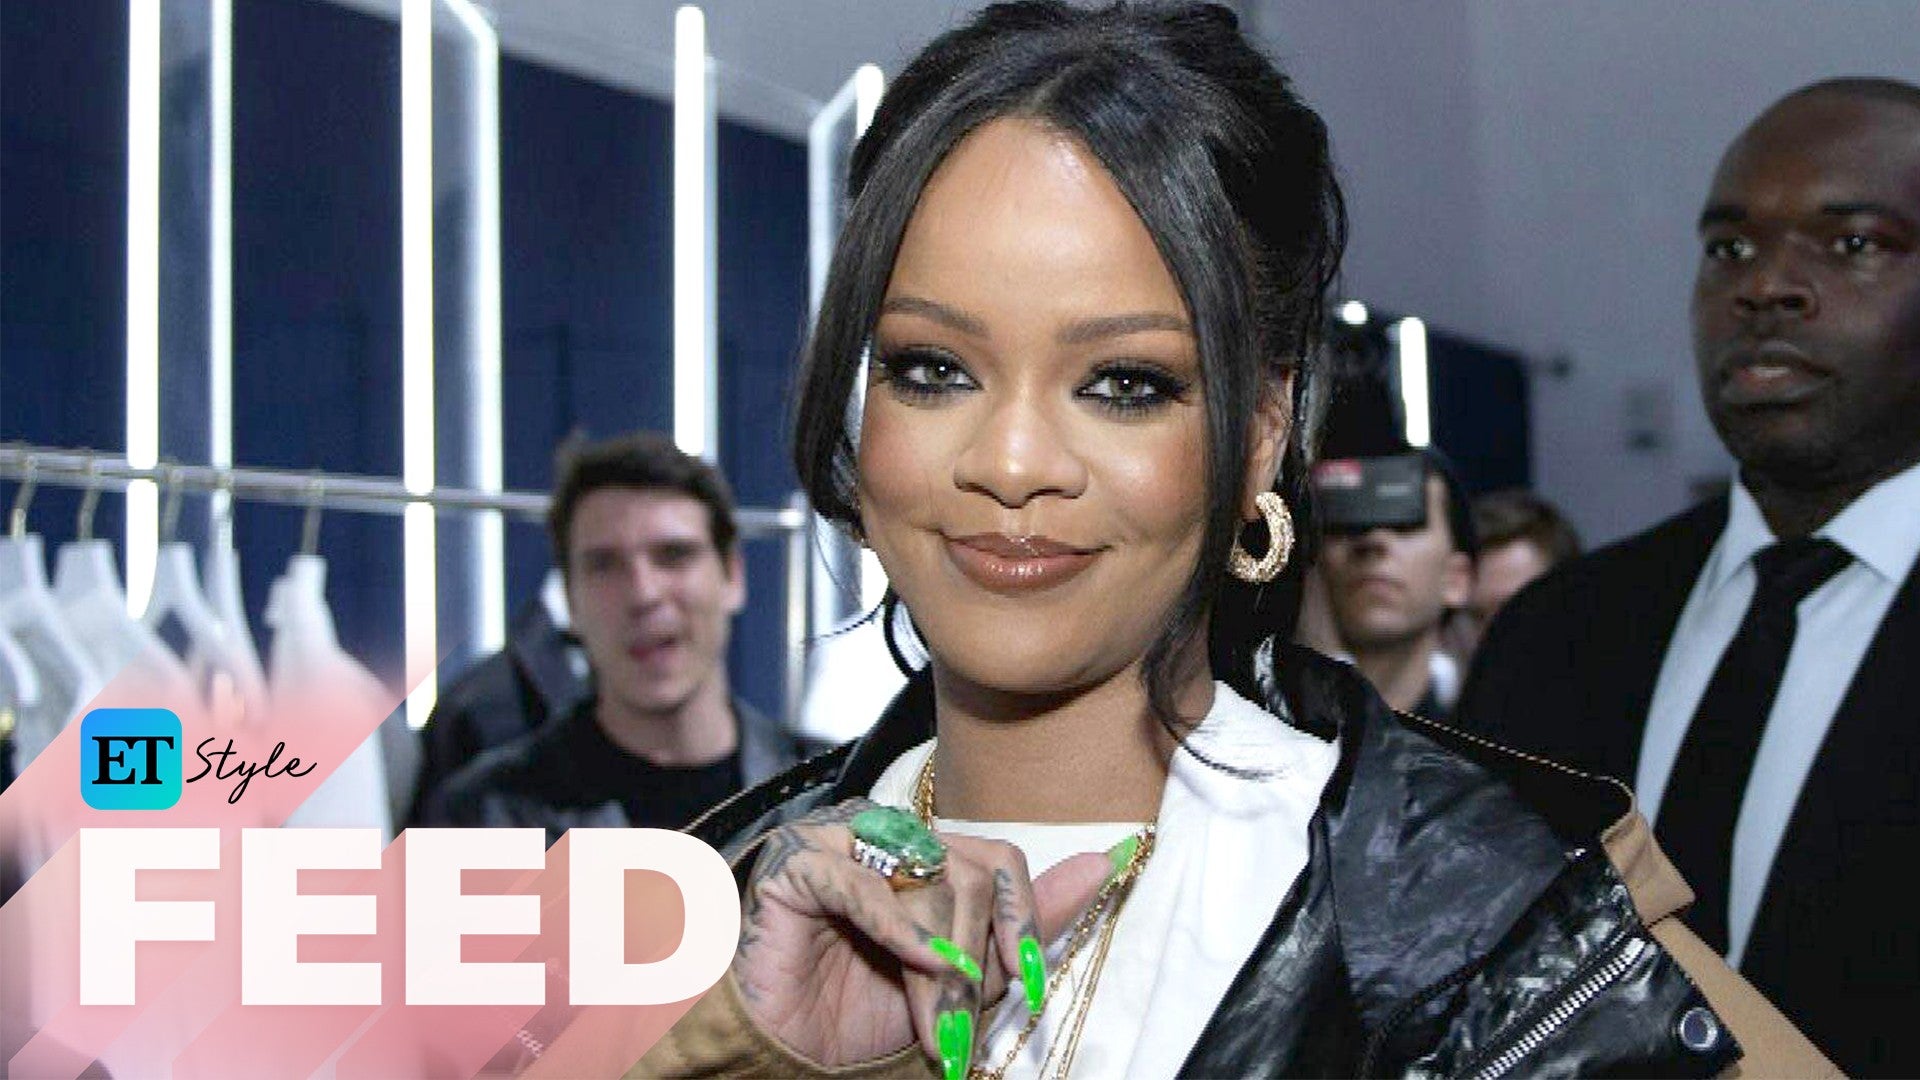 Everything you need to know about Rihanna's new clothing line